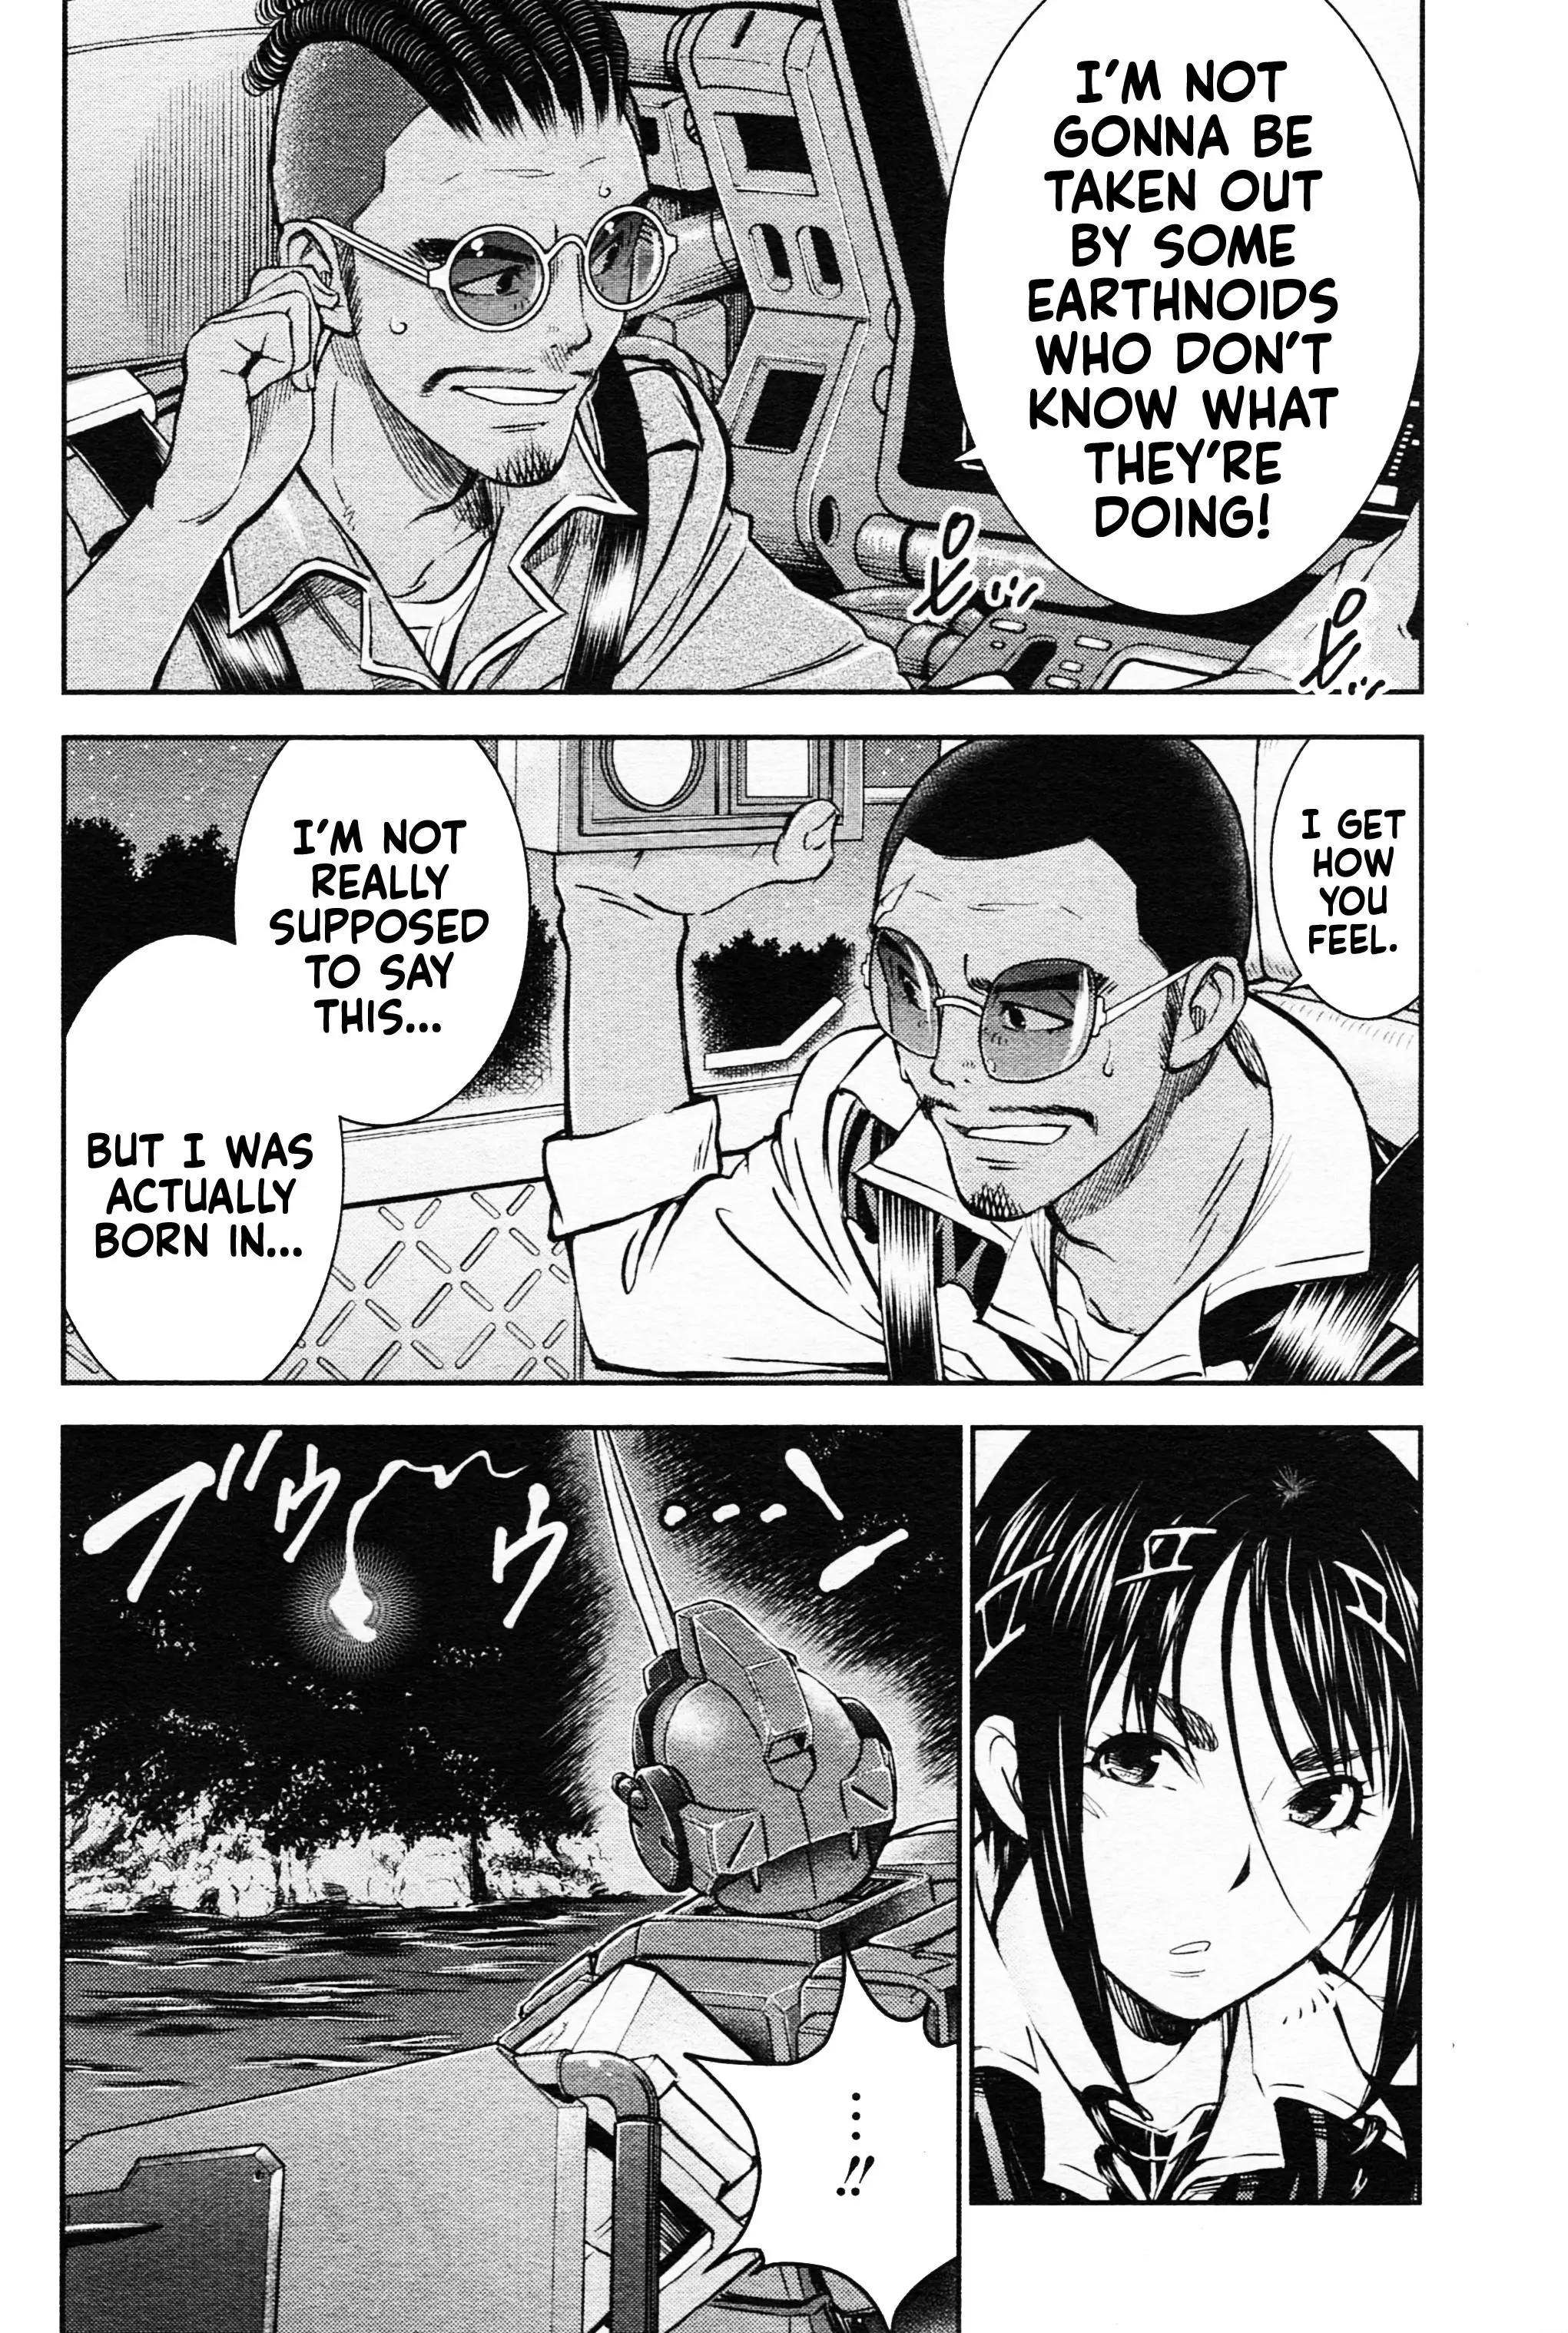 Mobile Suit Gundam: Red Giant 03Rd Ms Team - 3 page 31-1baeba23